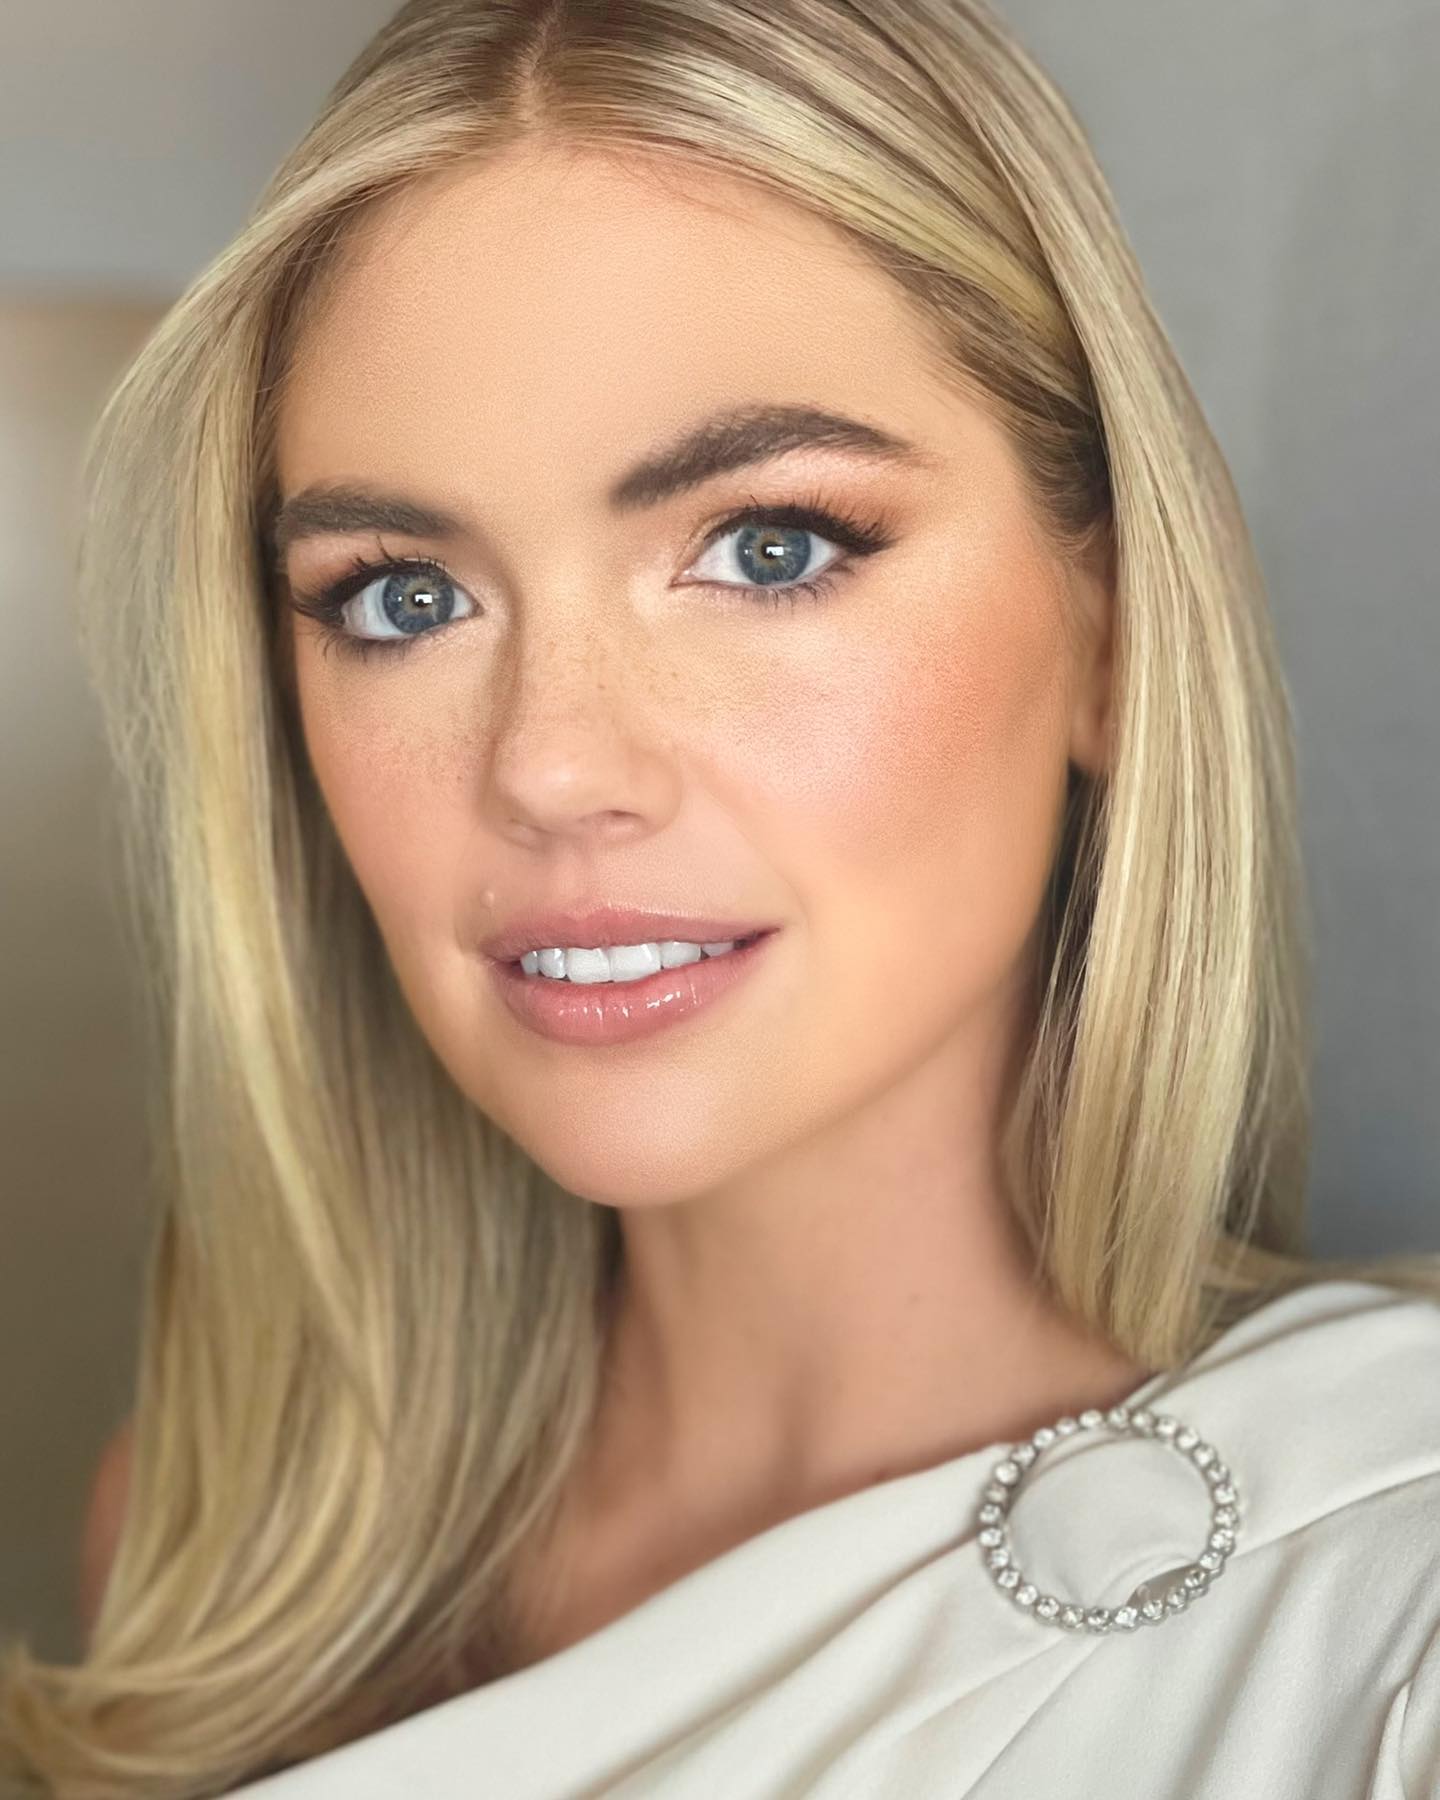 Kate Upton: Age, Height, Weight, Net Worth – The Complete Guide